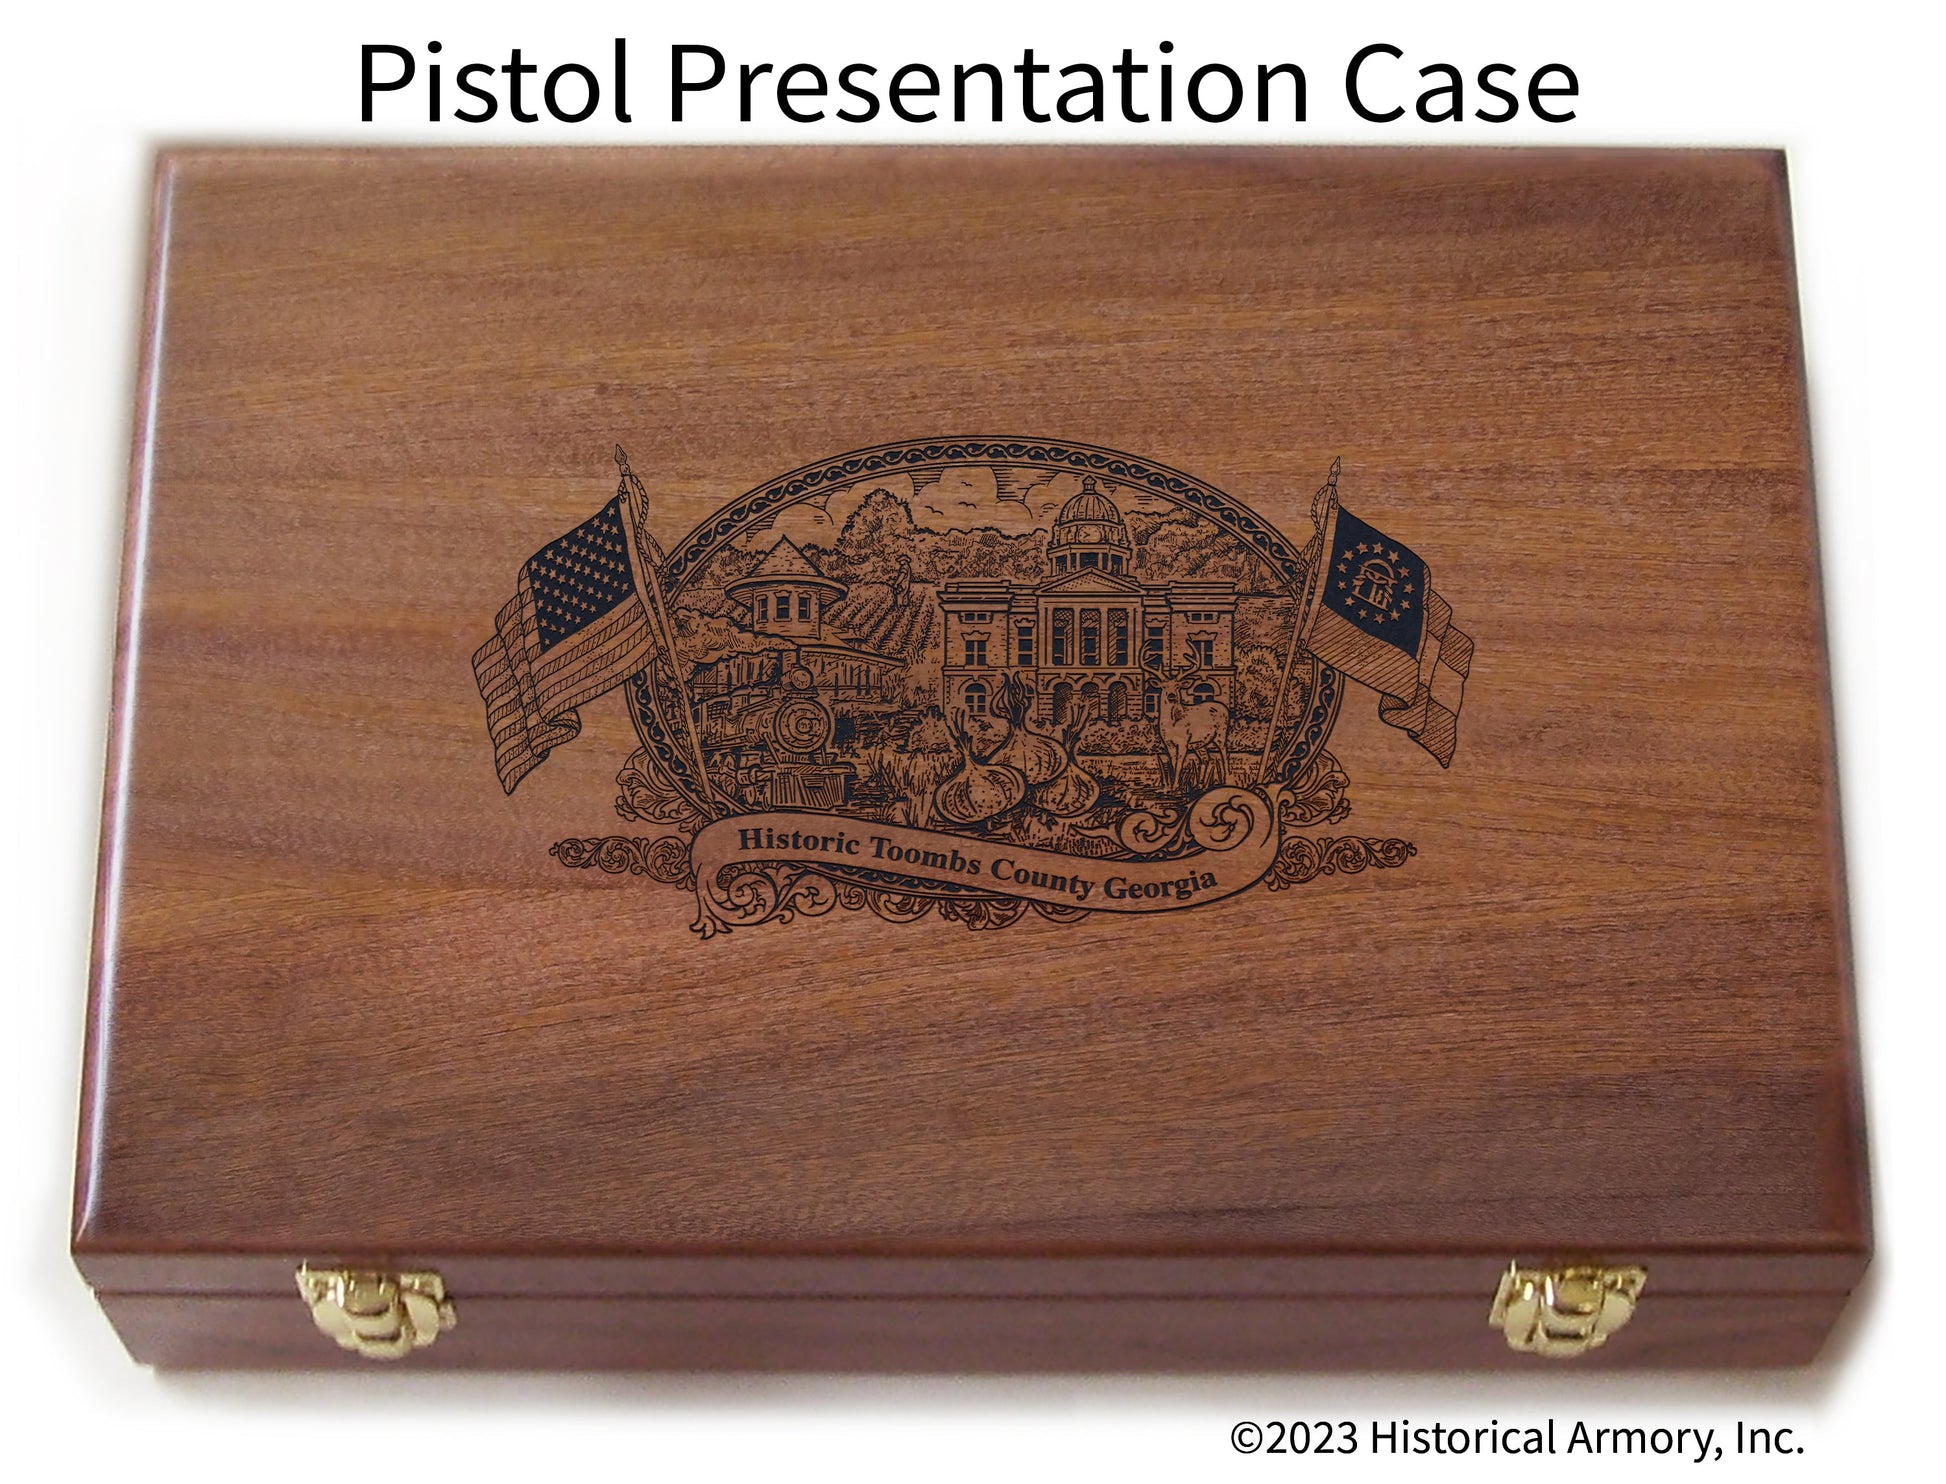 Toombs County Georgia Engraved .45 Auto Ruger 1911 Presentation Case